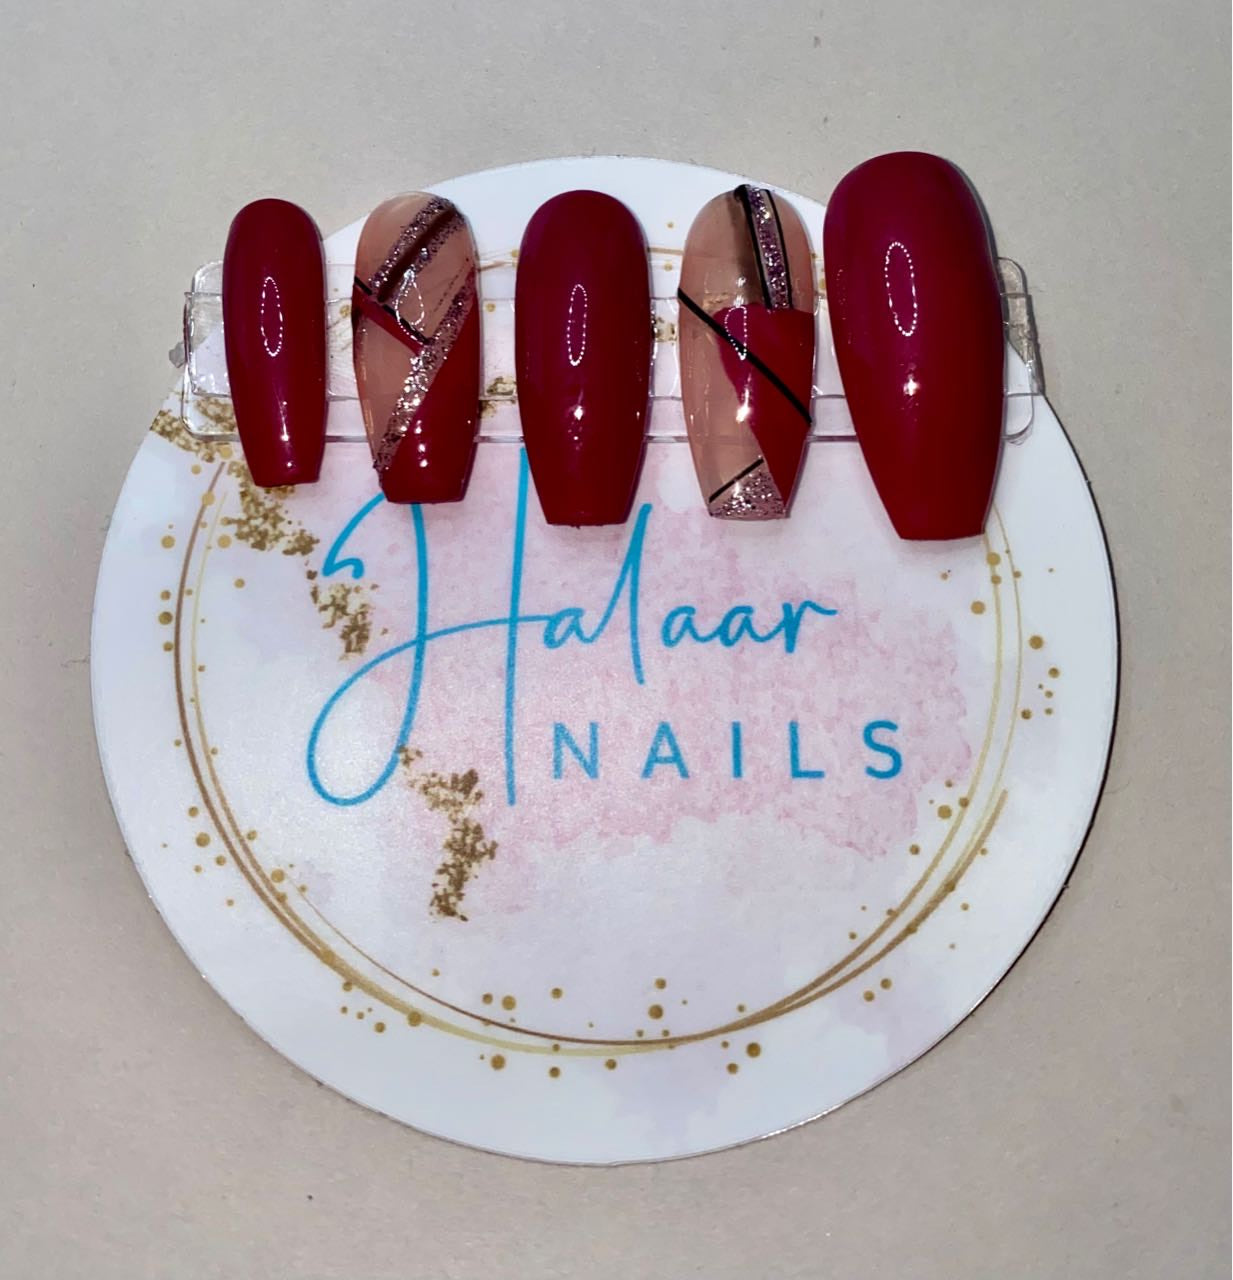 Mulberry nails